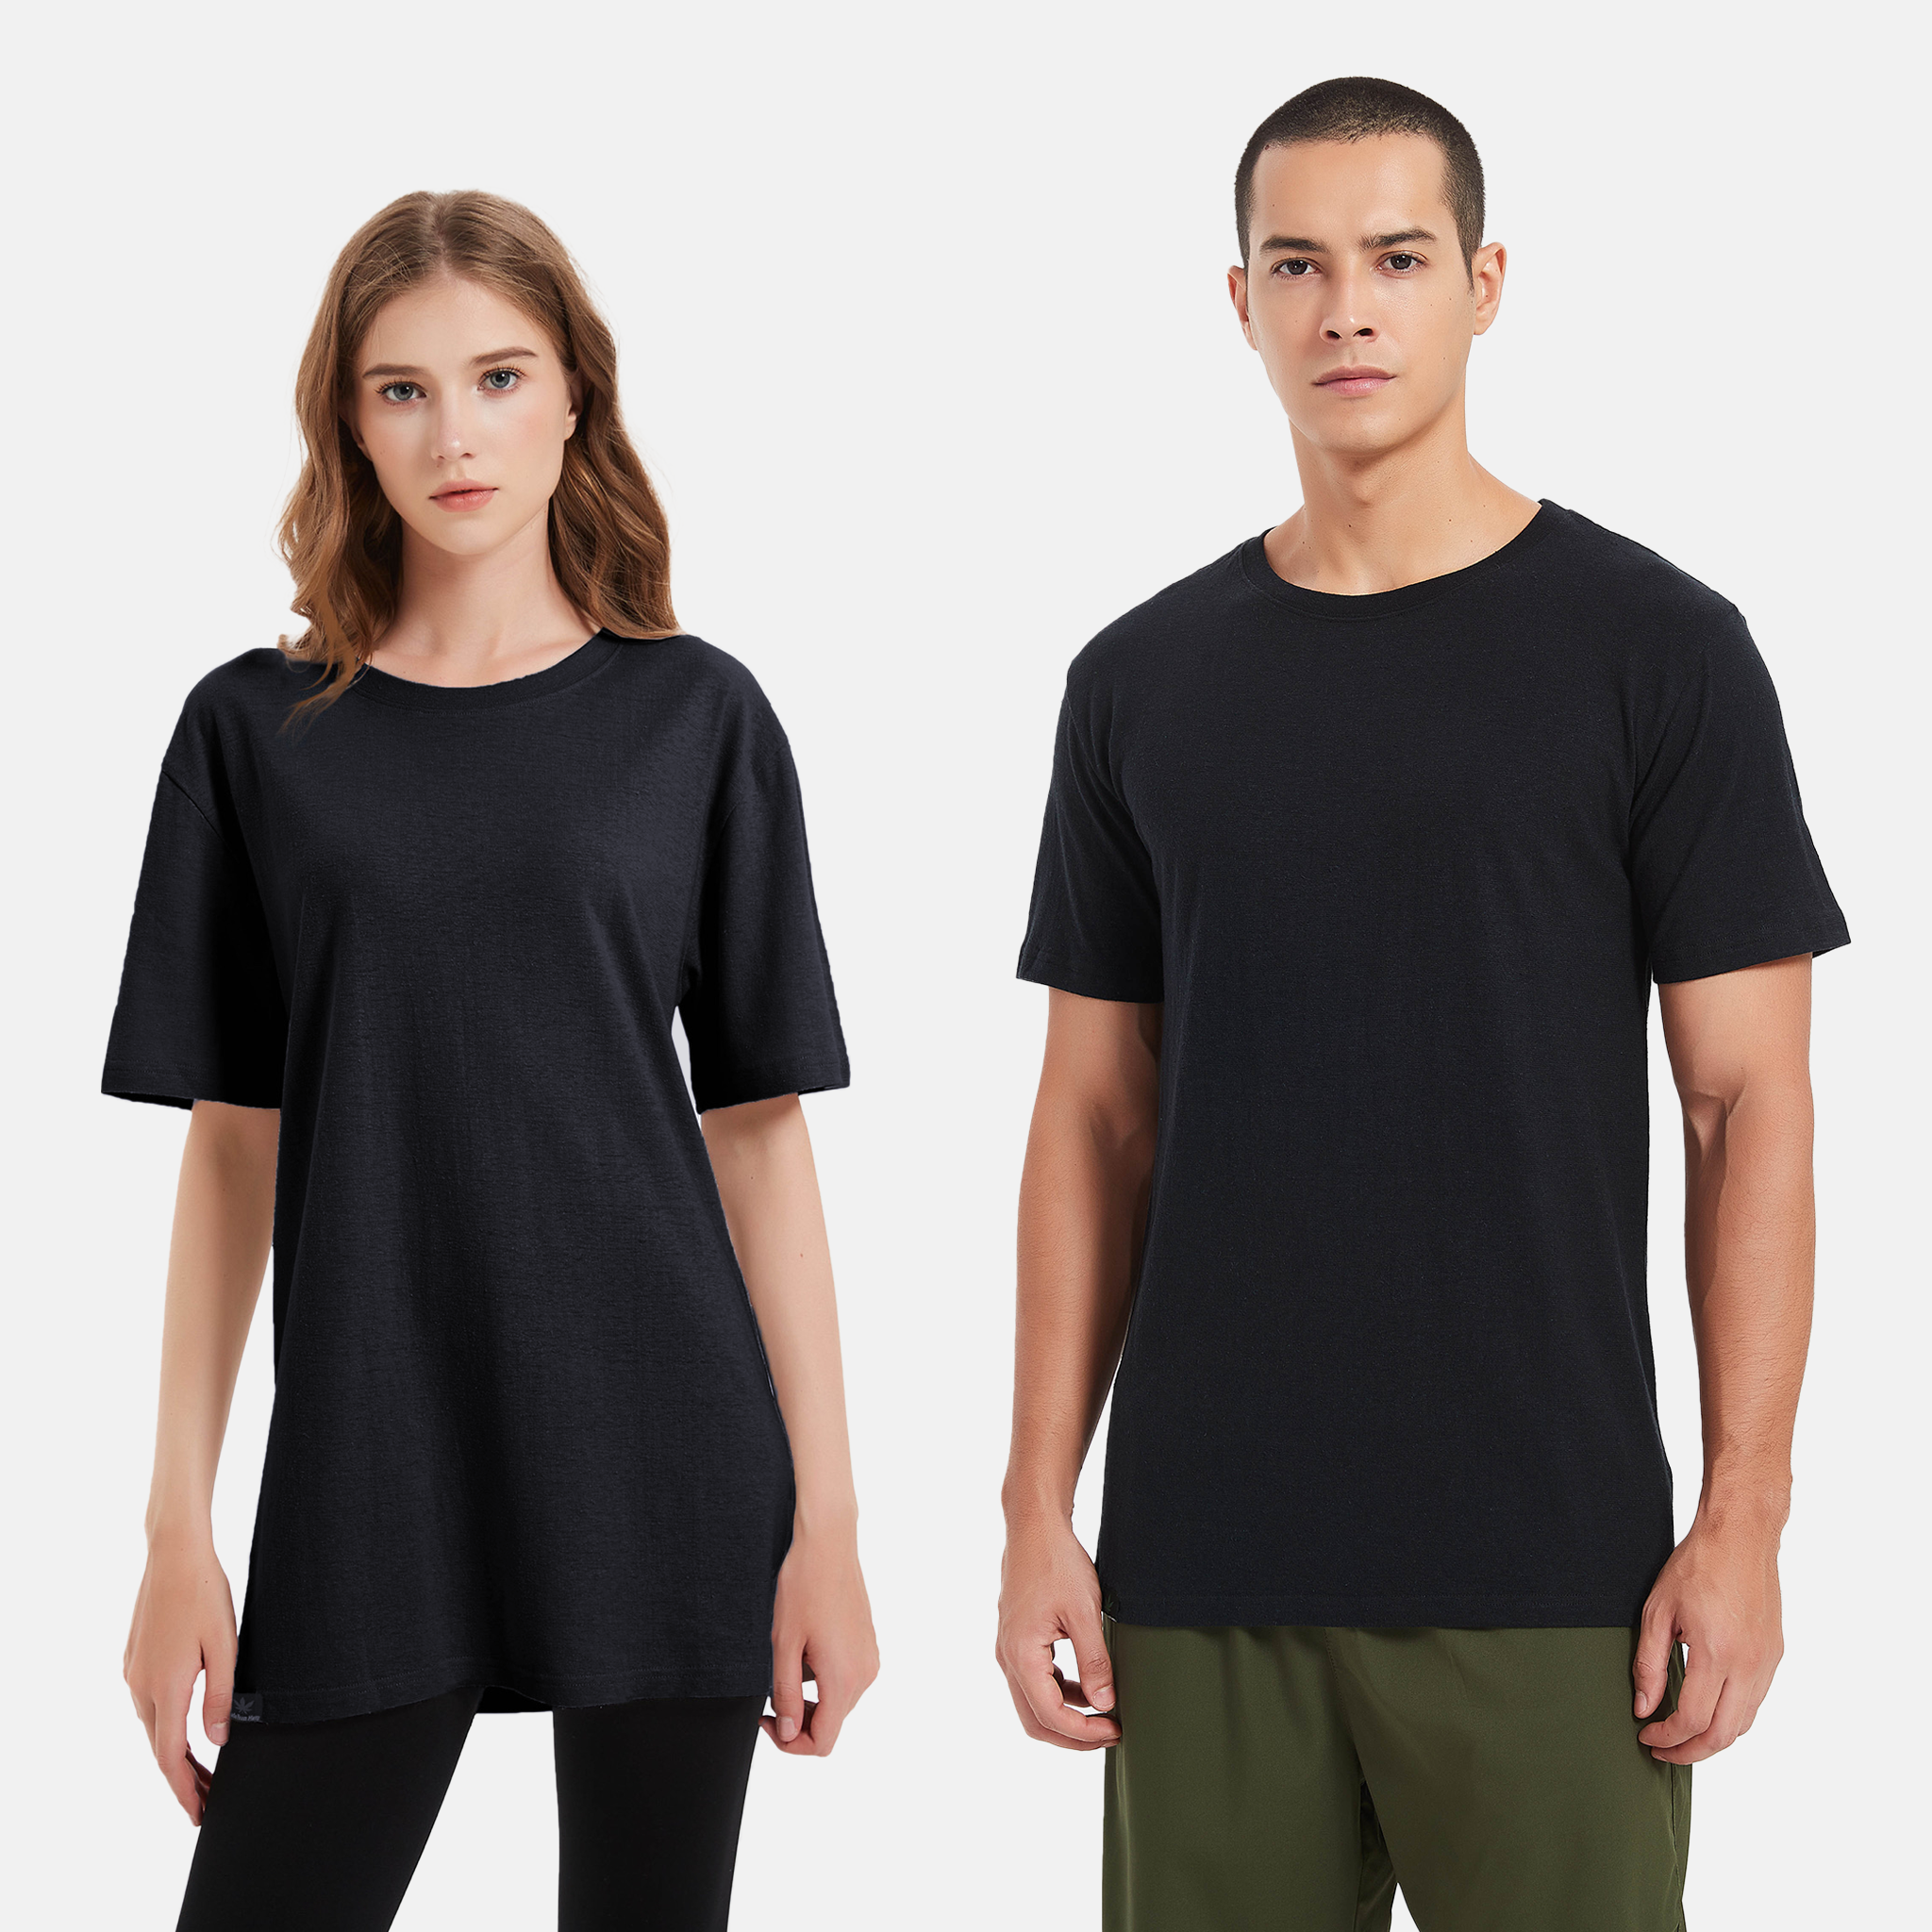 Organic cotton black t-shirt, sustainably sourced, eco-friendly, Mens and Womens, Unisex, Soft, Lightweight